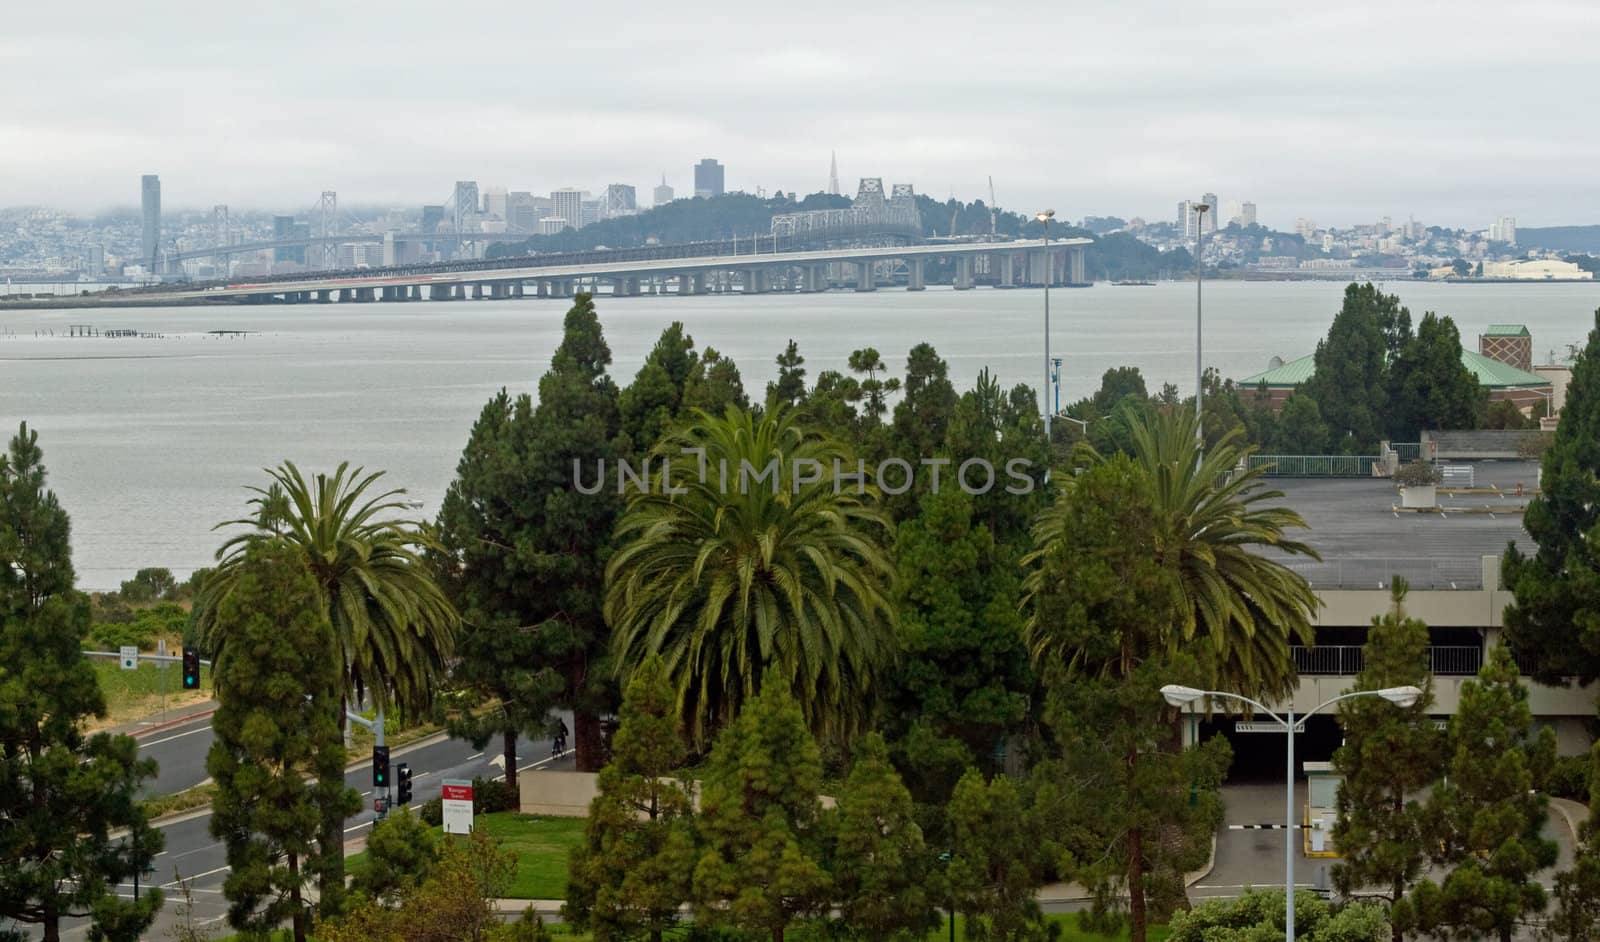 San Francisco as Seen from Across the with Bay Bridge on a Cloudy Day